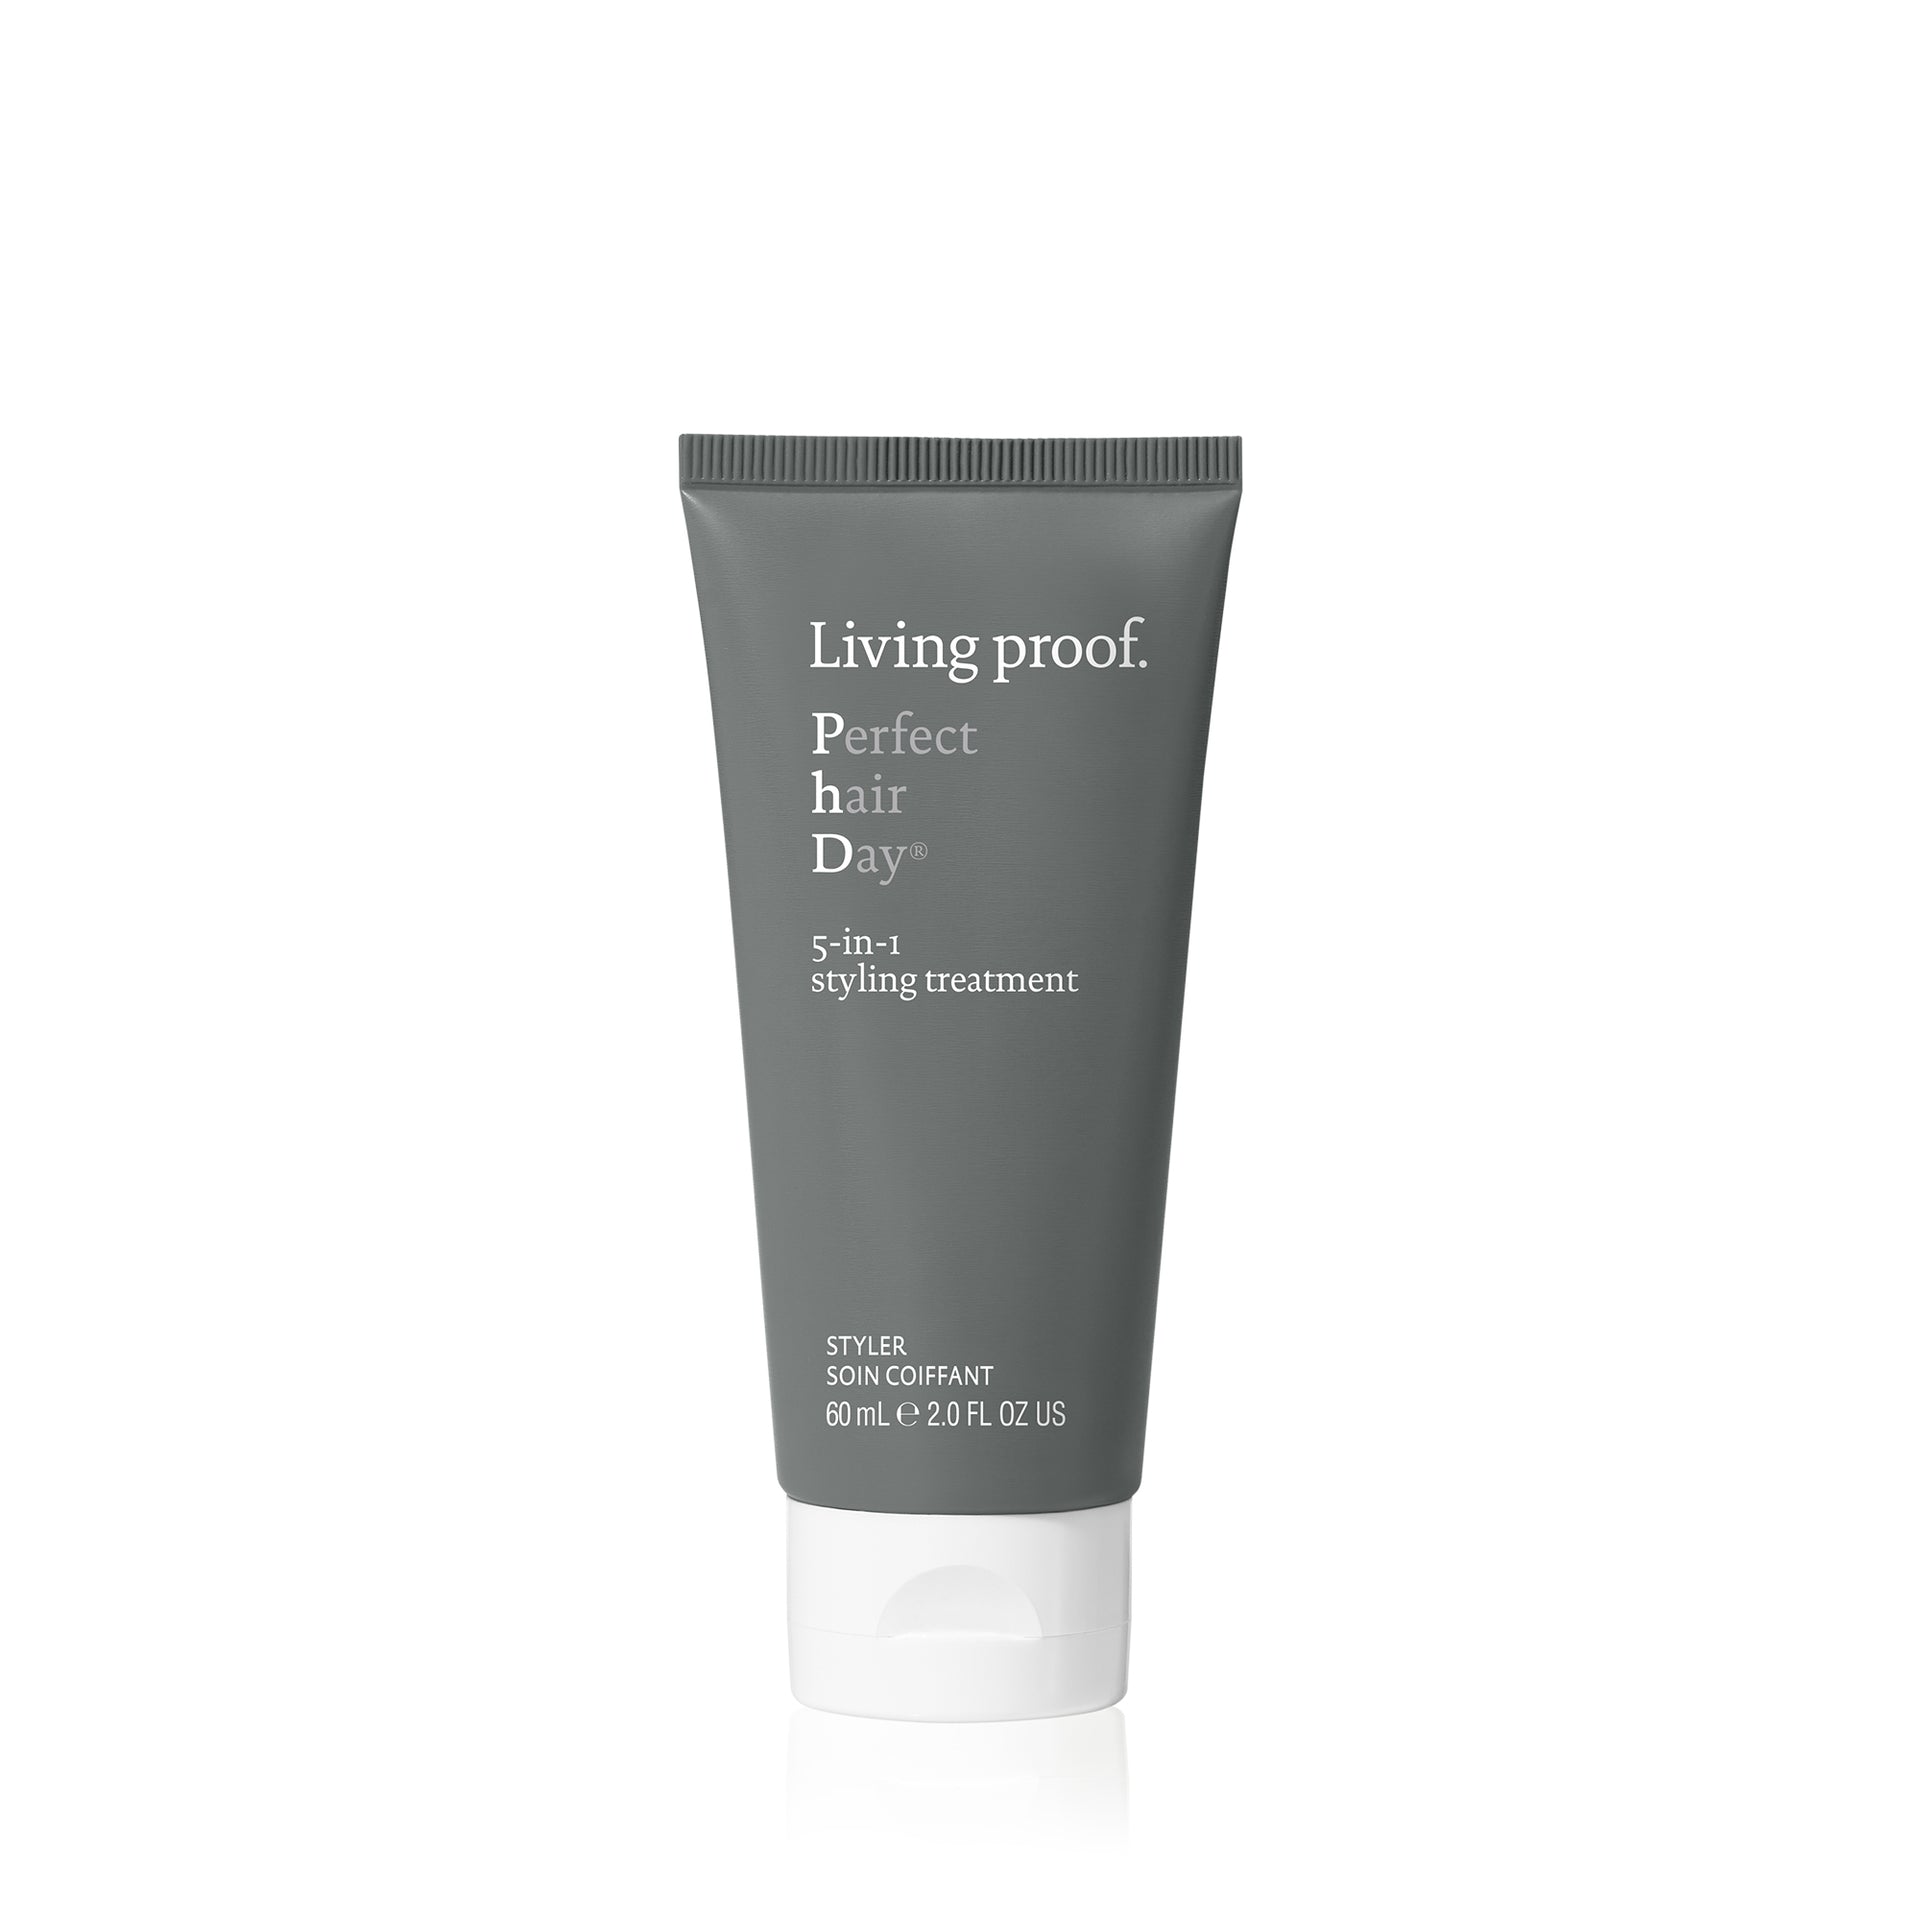 Living Proof PhD 5-in-1 Styling Treatment